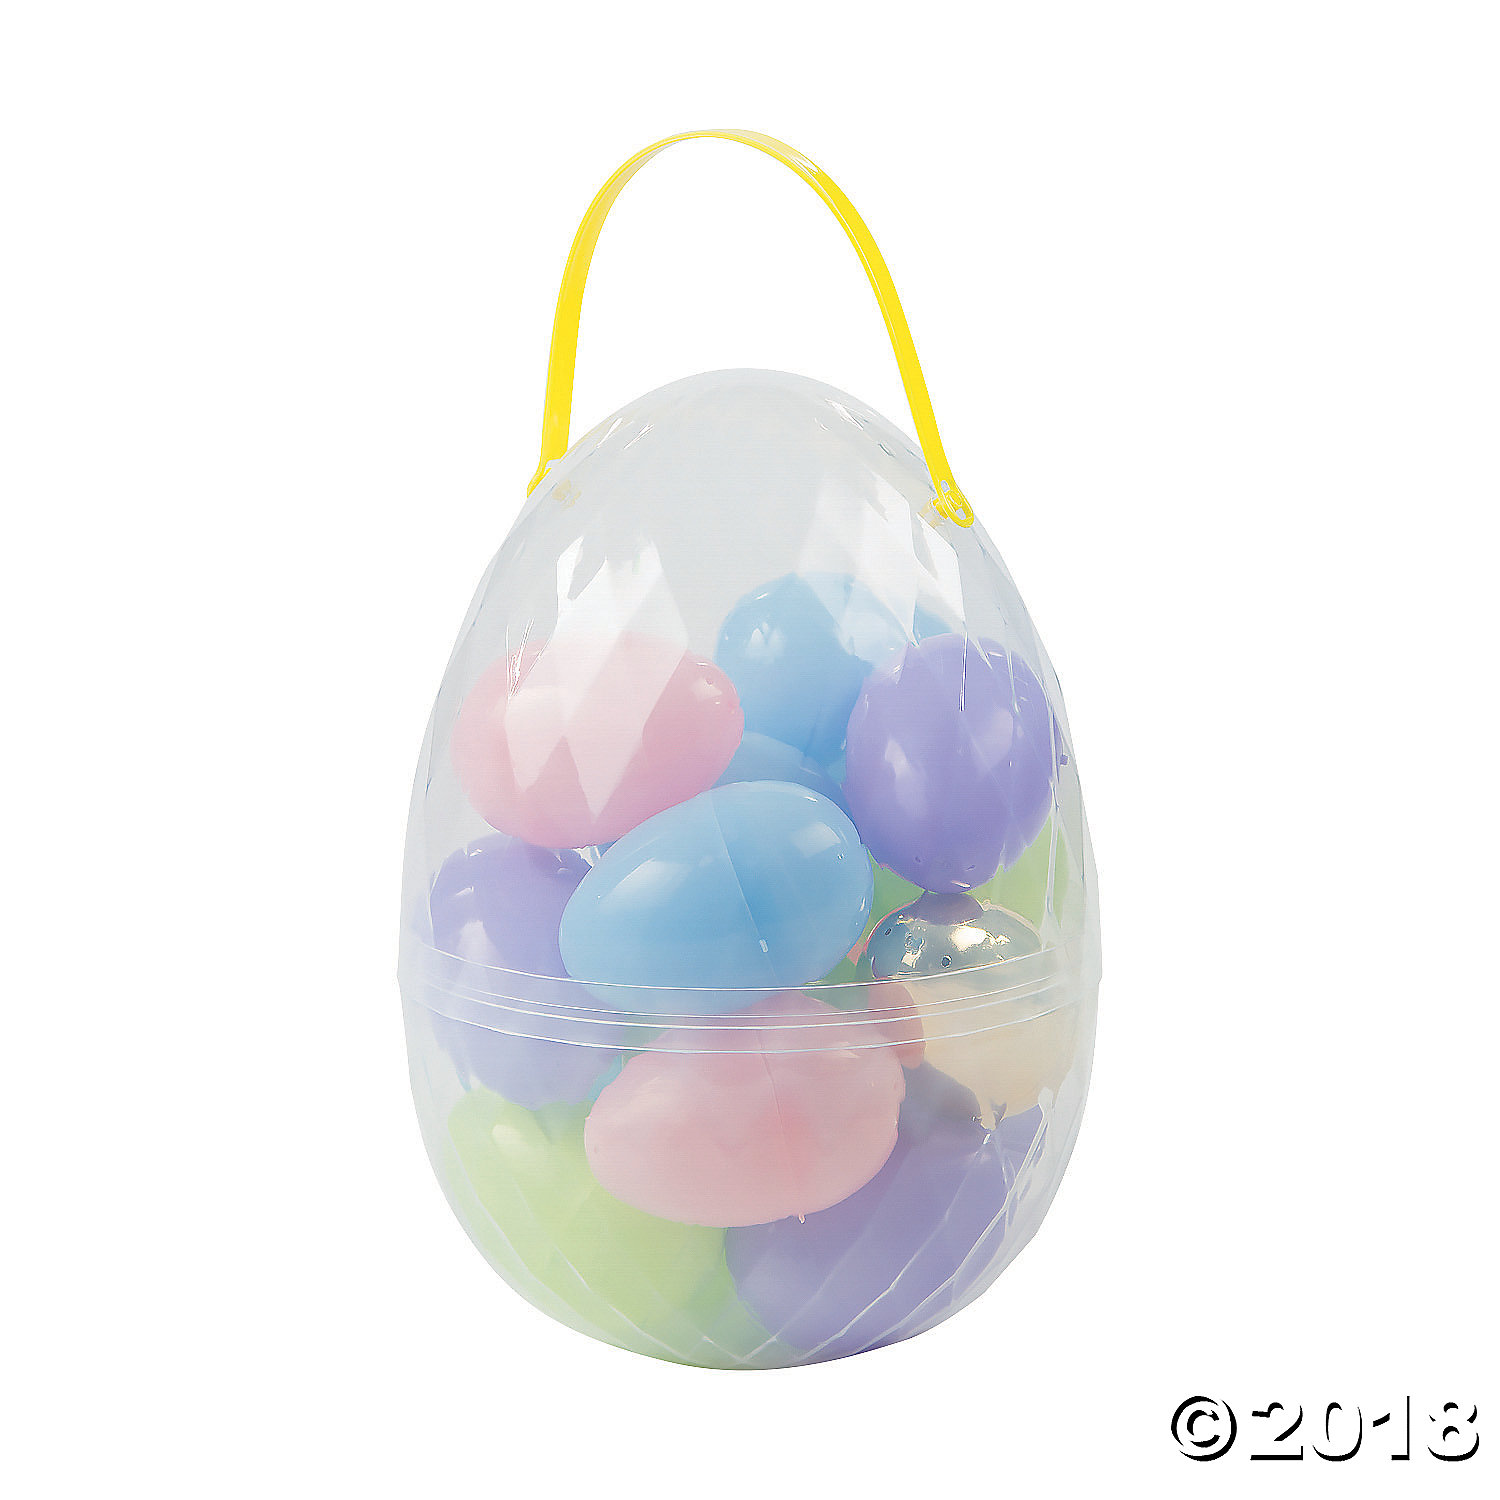 Large Egg Container with Easter Eggs - 18 Pc.